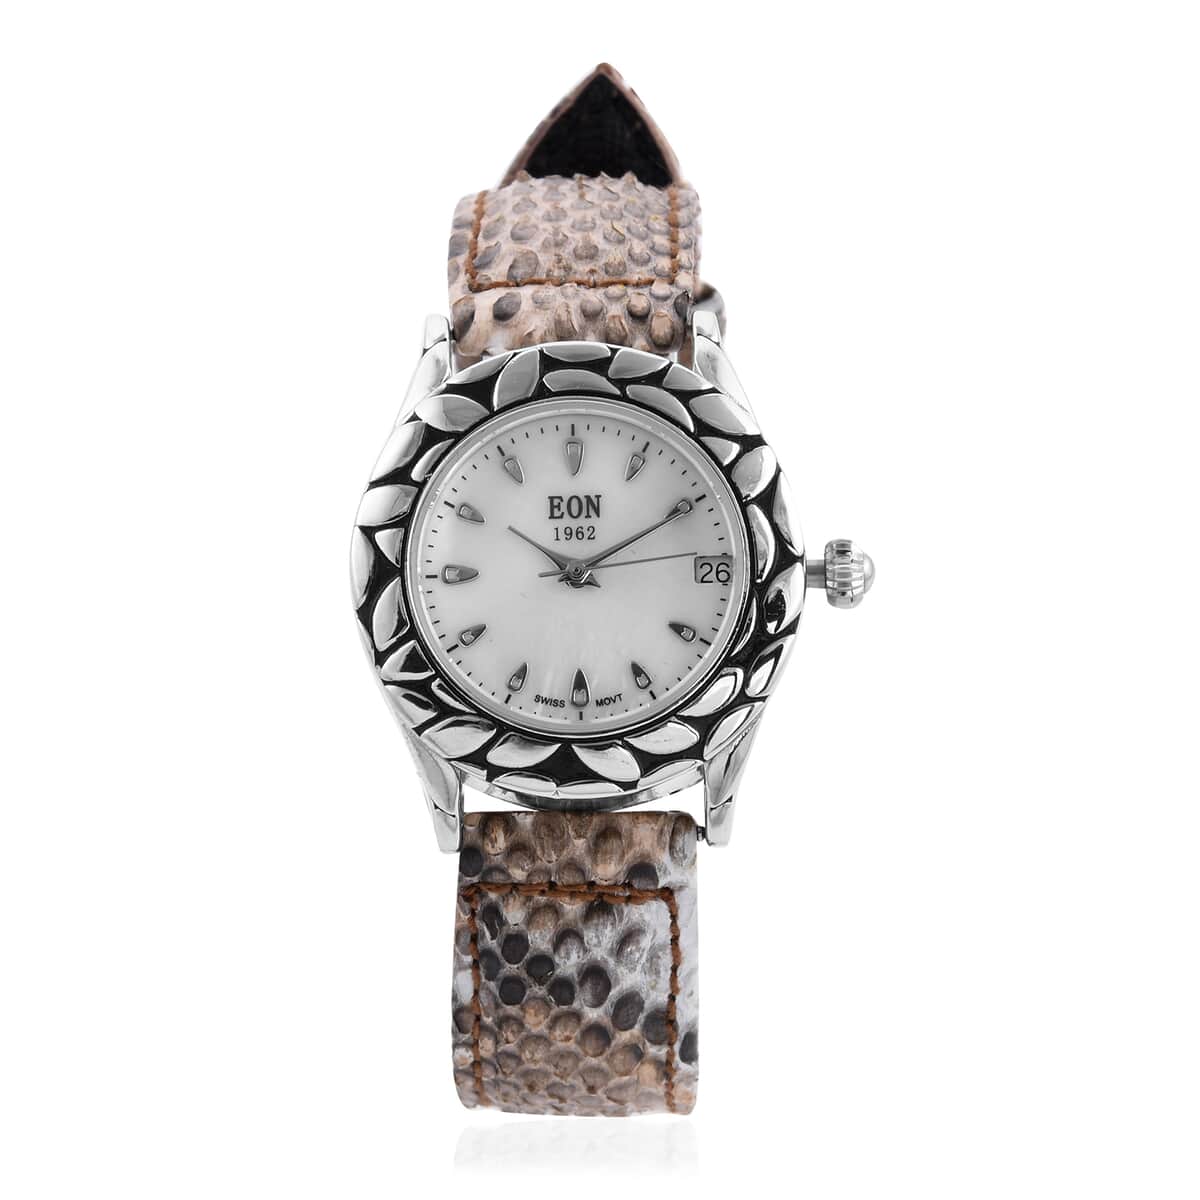 EON 1962 Swiss Movement Watch with Brown and White Python Leather Band image number 0